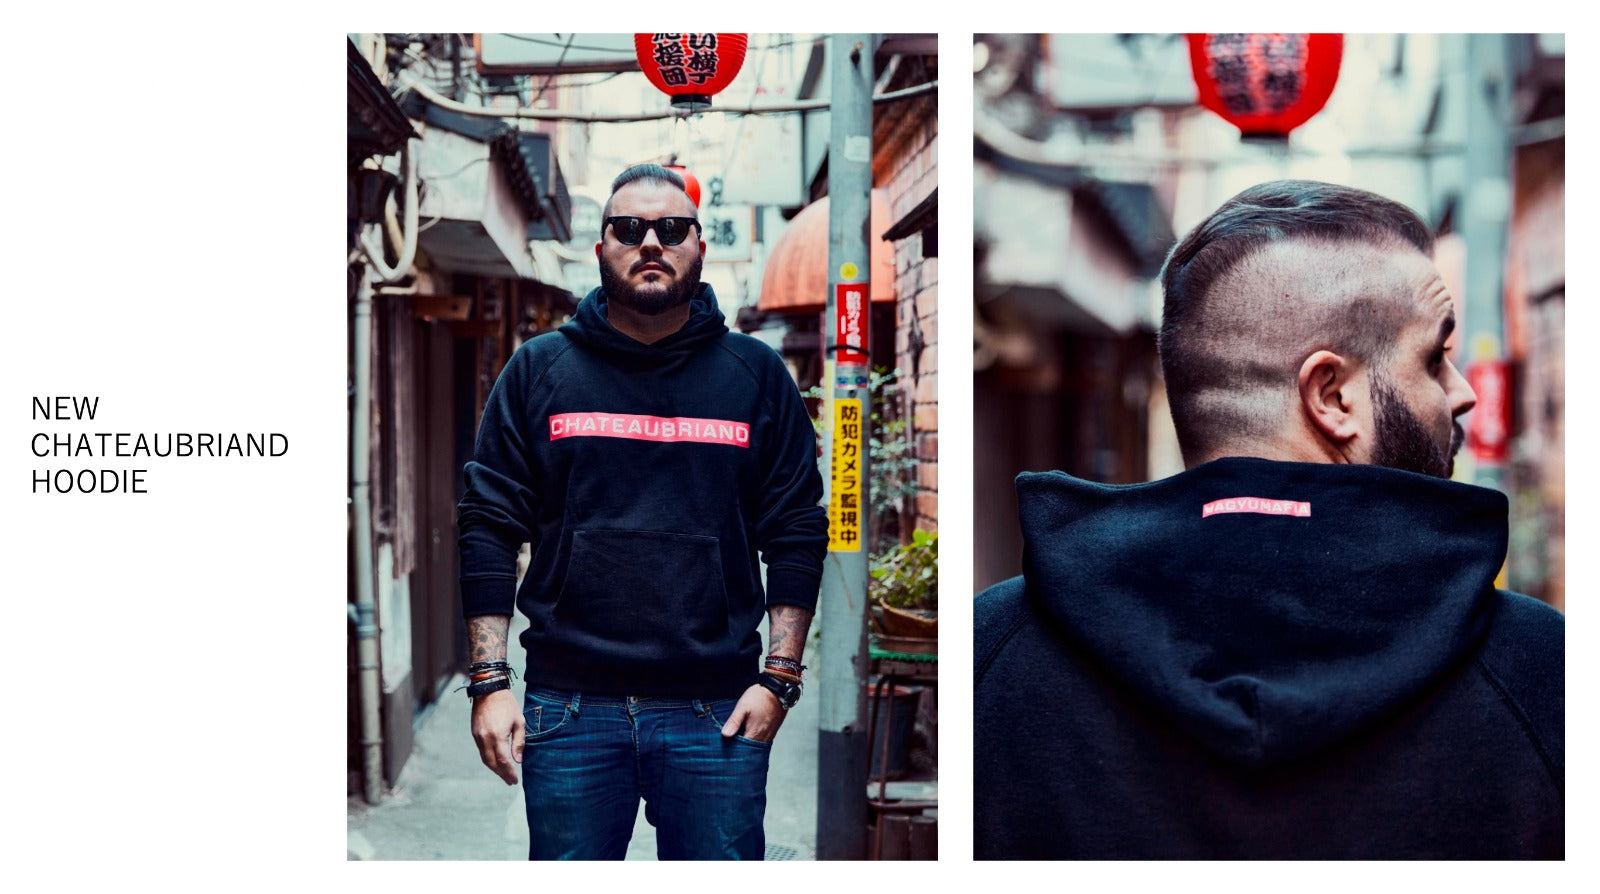 Chateaubriand Hoodie (Red Label)